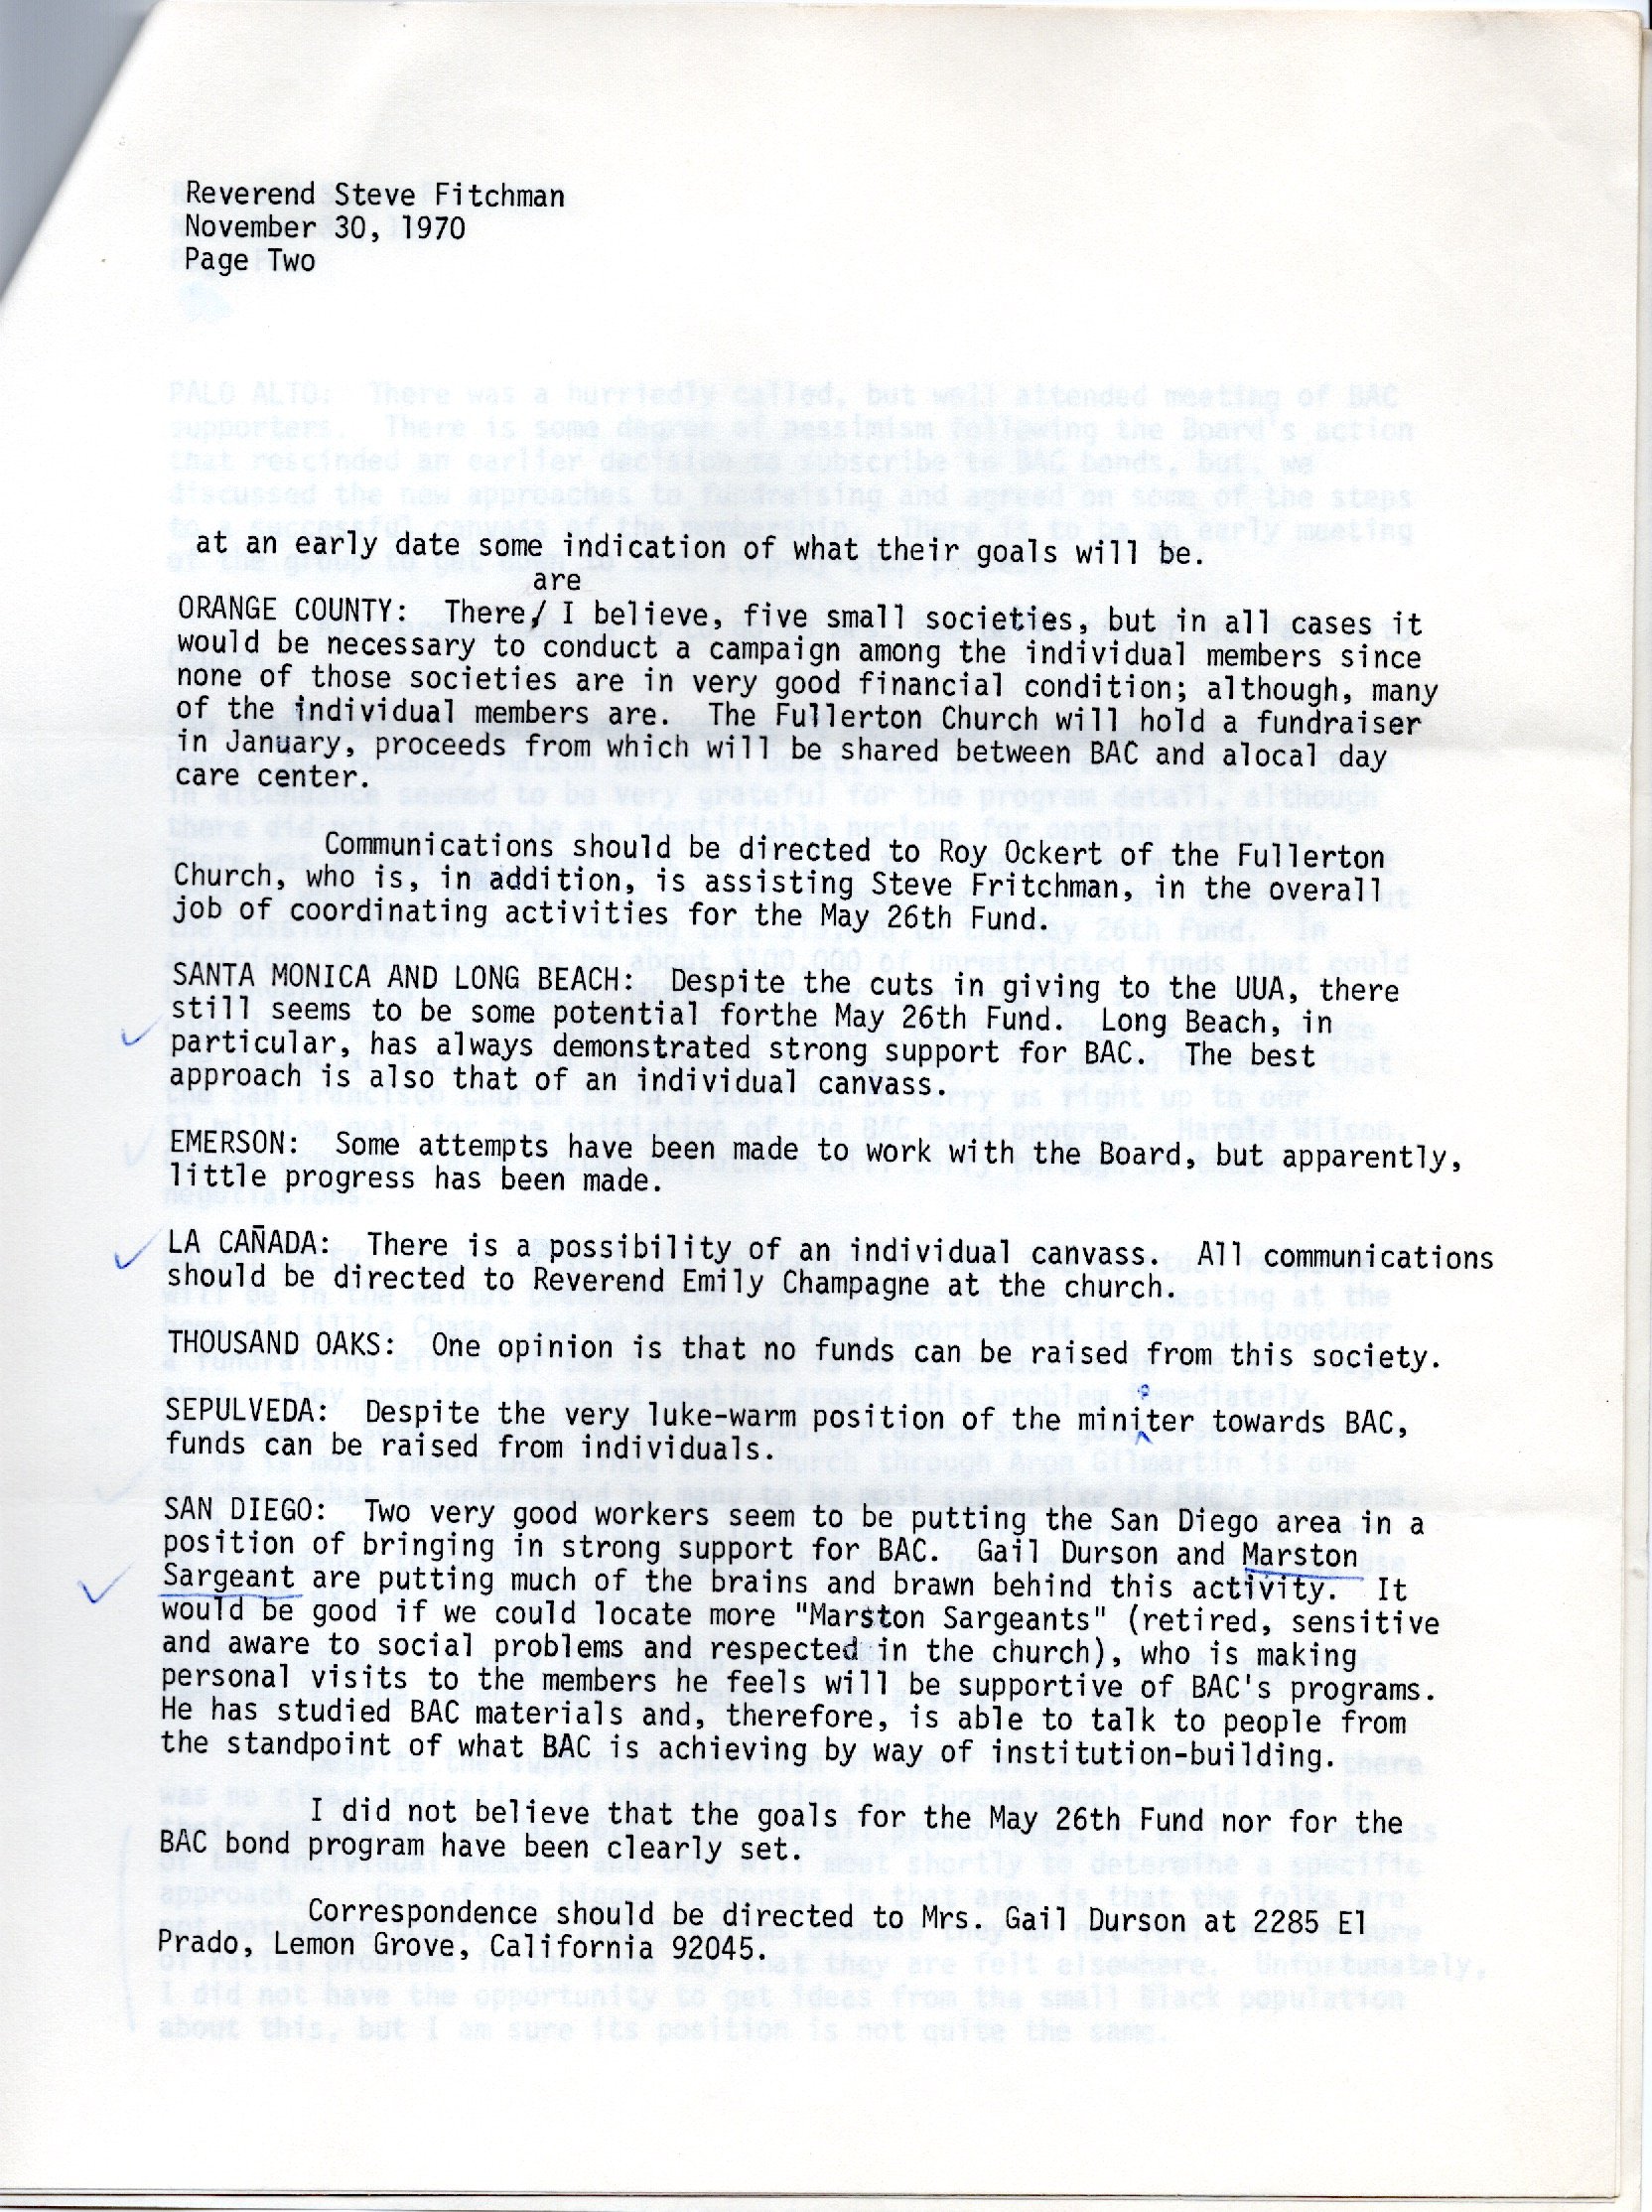 1970.11.30 memo from Dick Traylor to Fritchman_0002.jpg